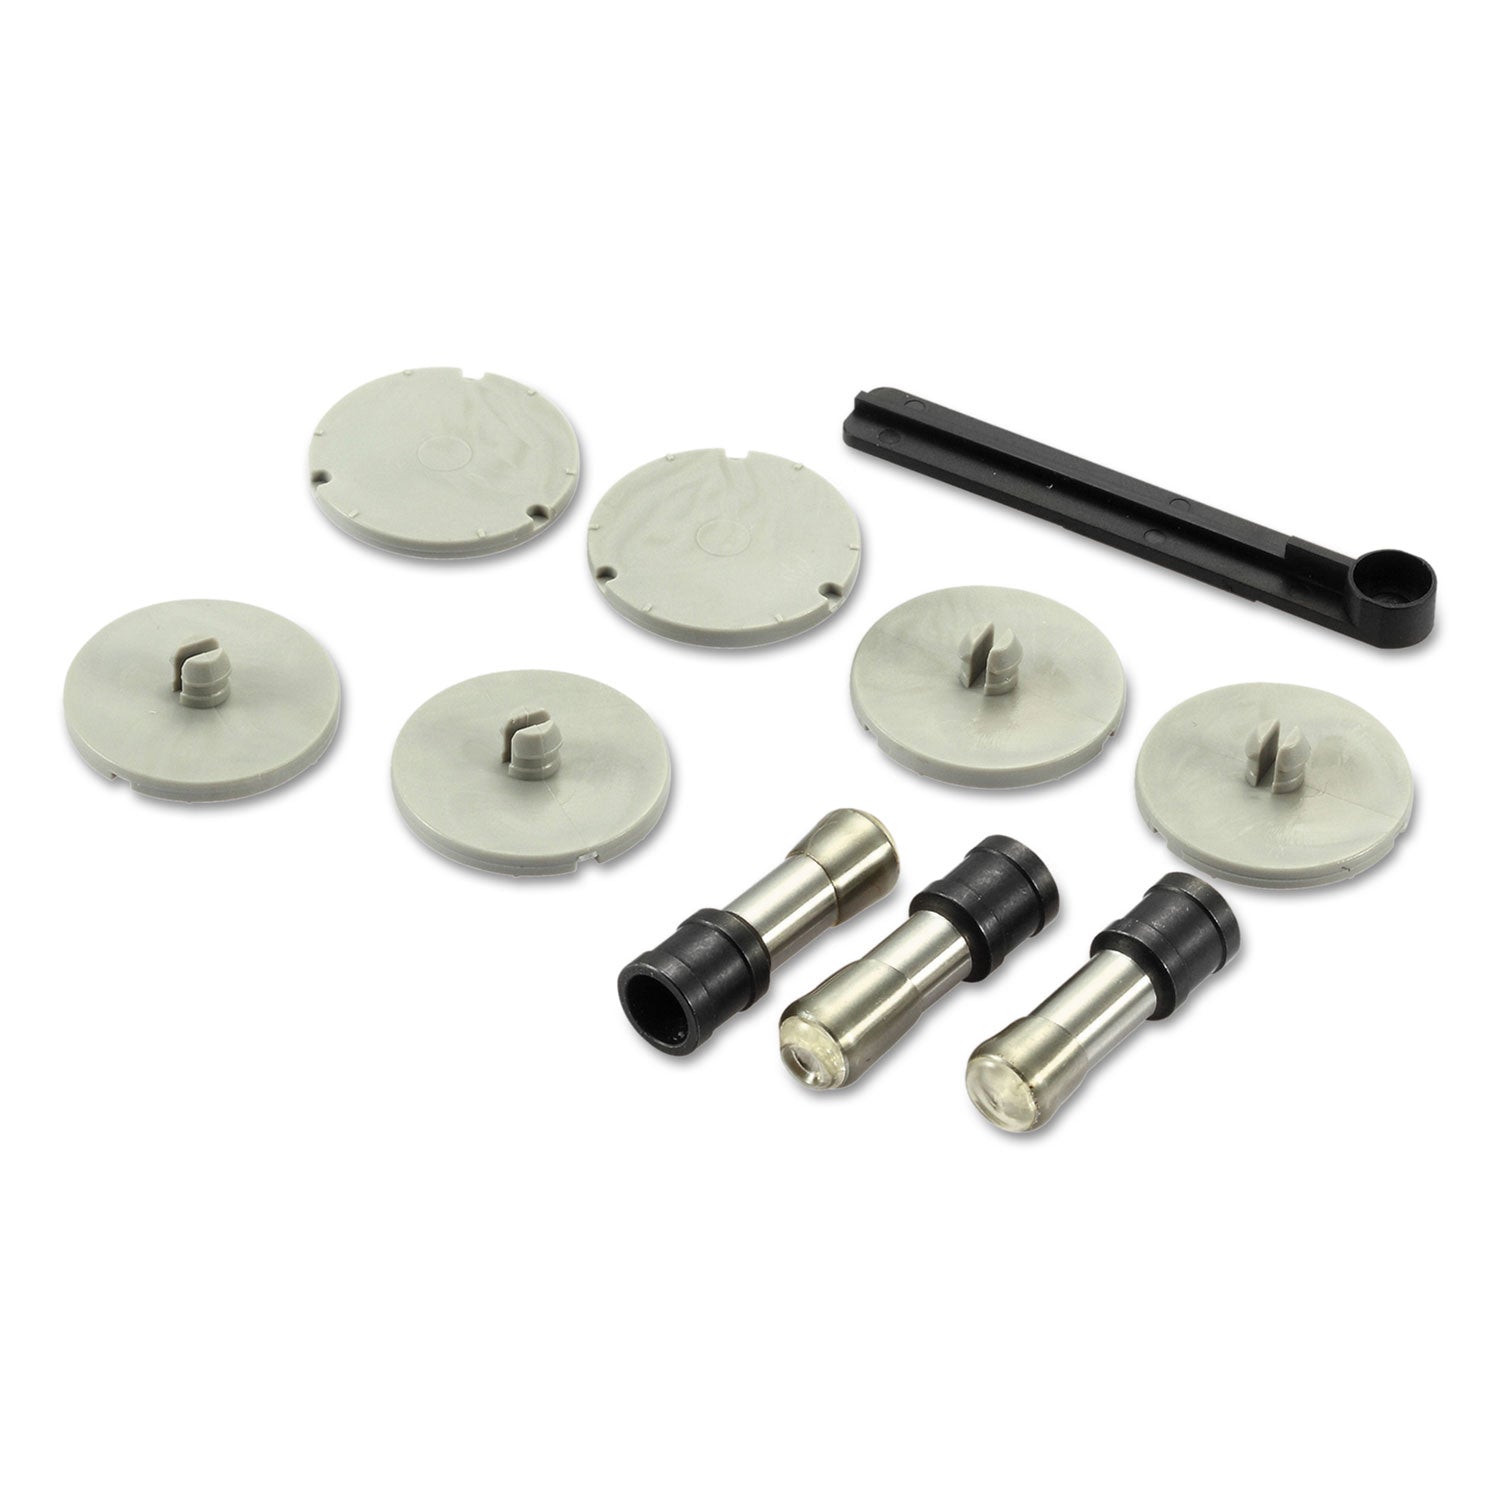 03200-xtreme-duty-replacement-punch-heads-and-disc-set-9-32-diameter_bos03203 - 1